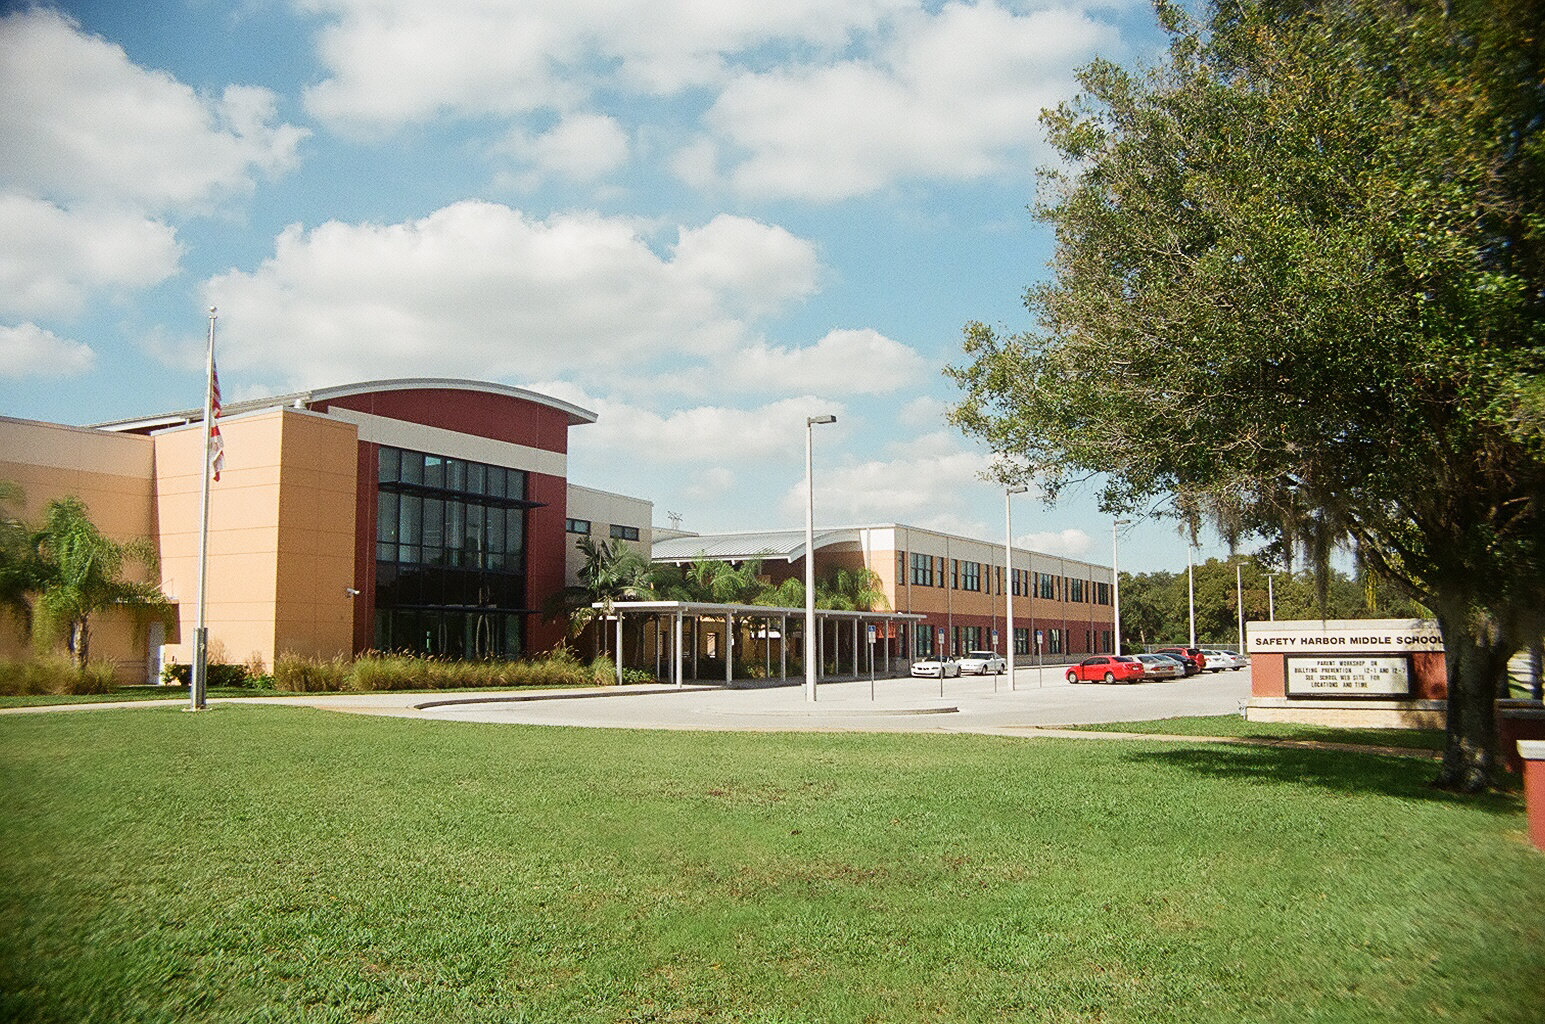 Safety_harbor_middle_school